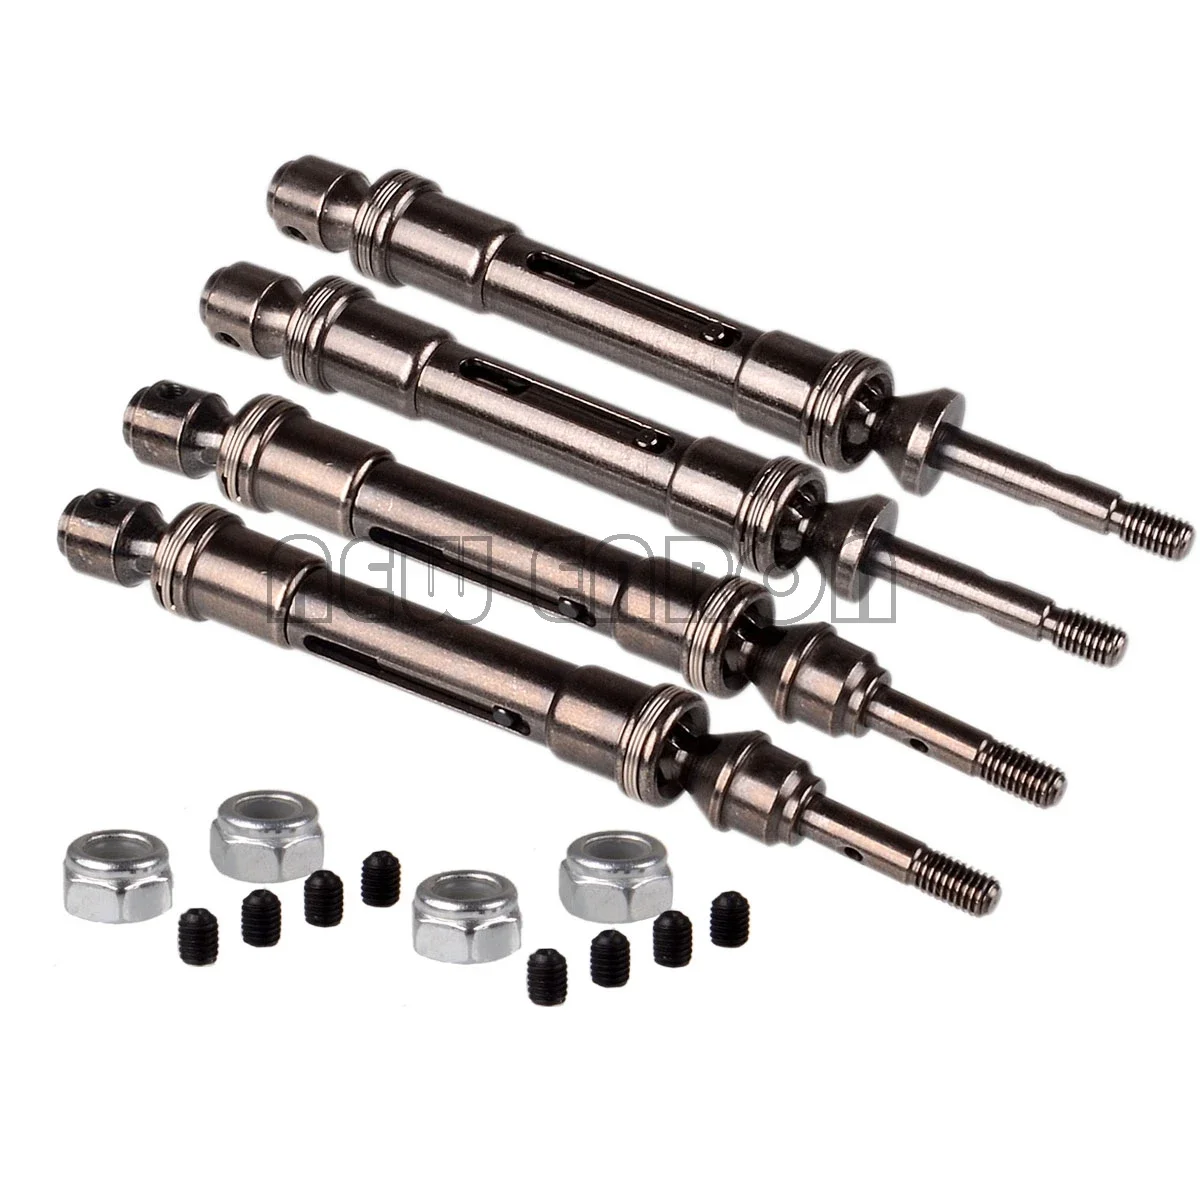 

NEW ENRON 6851X/6852X Aluminum Front/Rear Driveshaft Assembly For RC Traxxas 1/10 Slash 4x4/2WD Stampede 4X4 Upgrade Parts